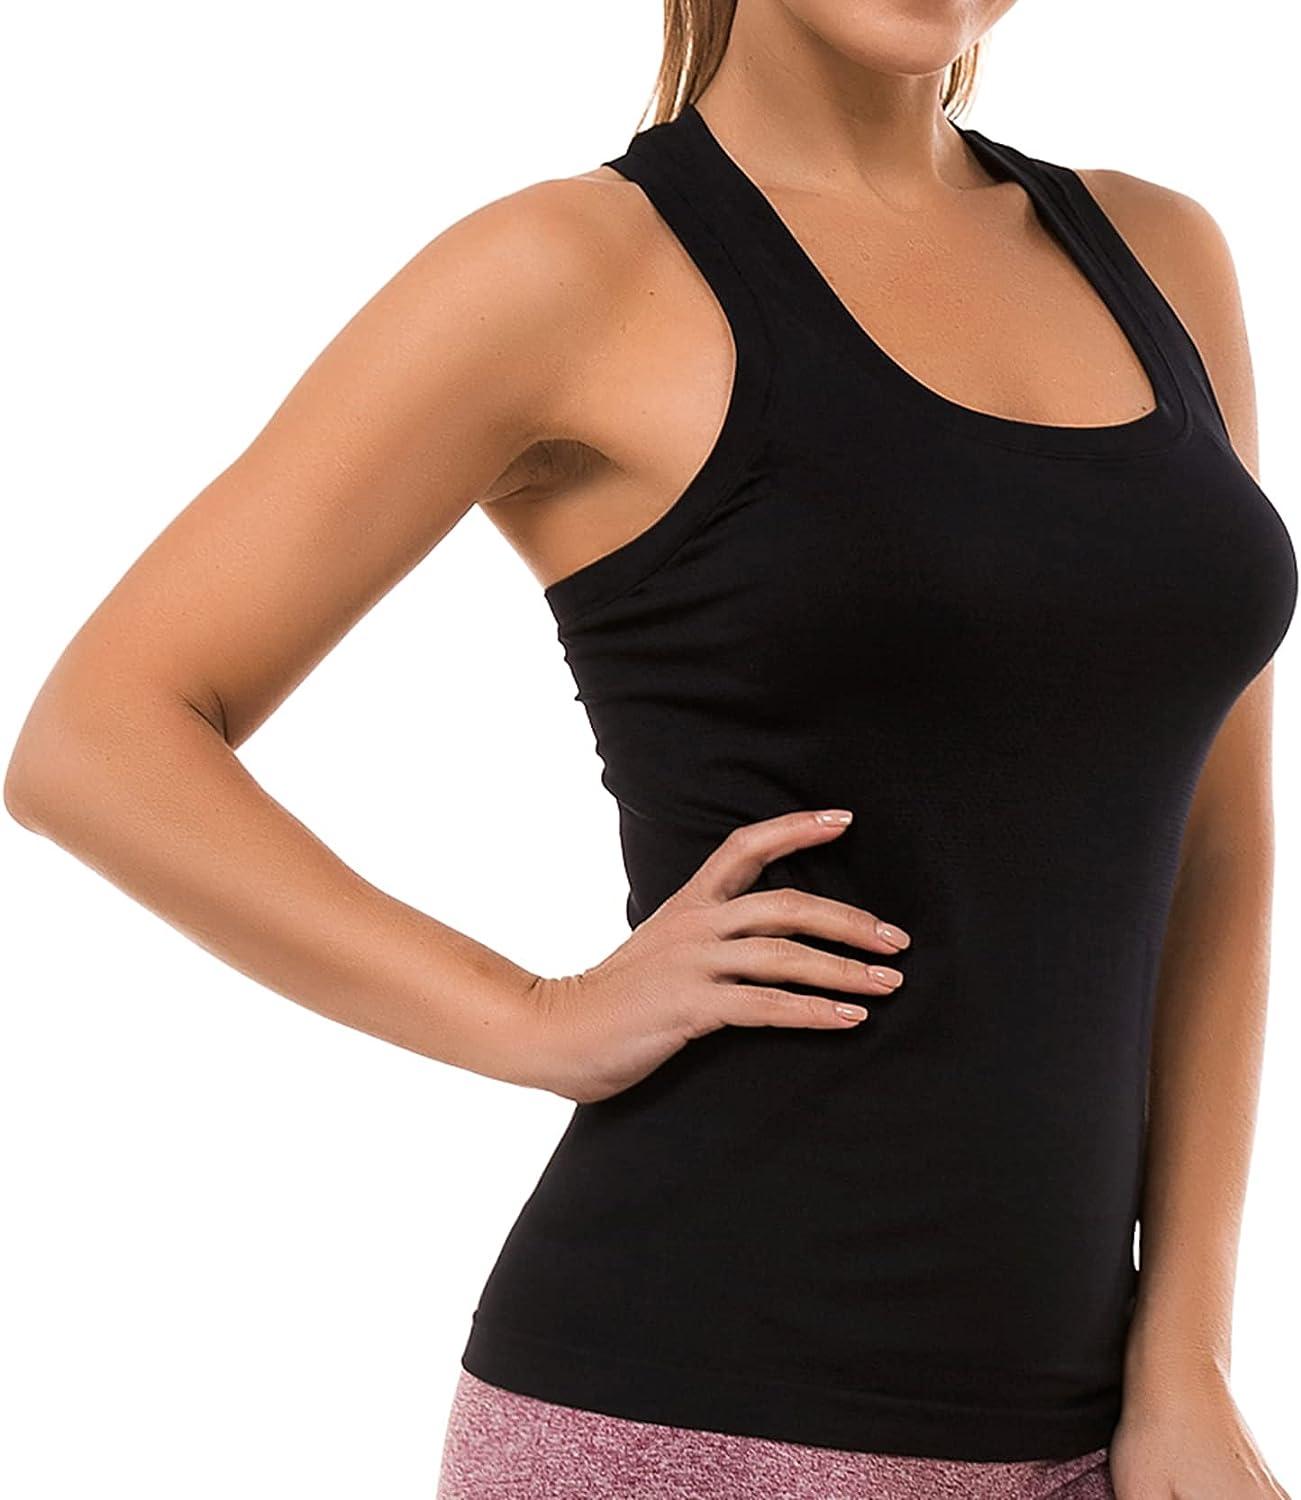 Workout Tops For Women Yoga Athletic Shirts Long Tank Tops Gym Workout